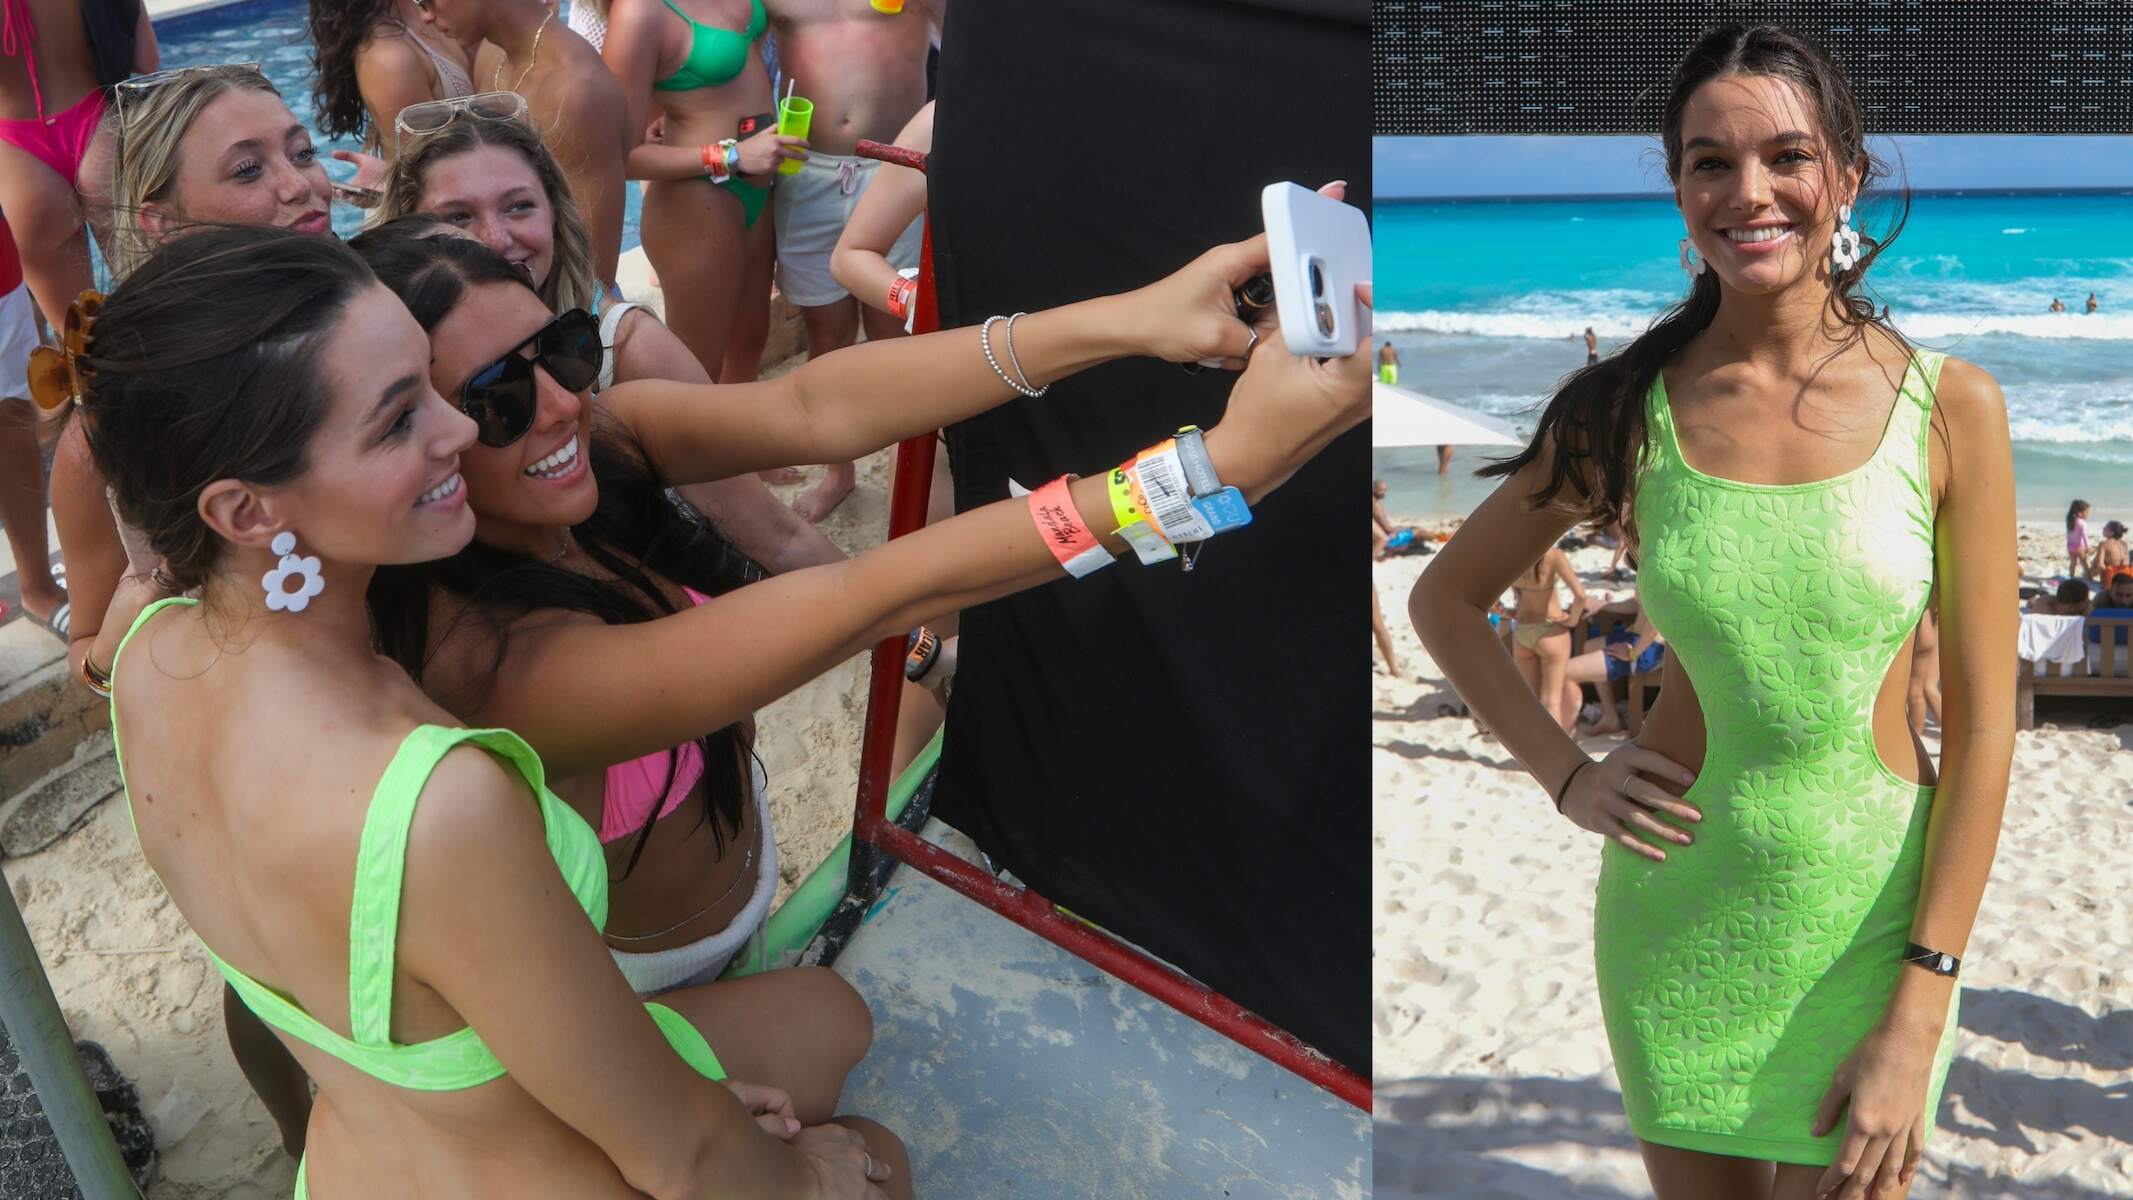 Vanderpump Rules star Ally Lewber takes a selfie with a fan while wearing a green dress at James Kennedy's DJ set in Cancun